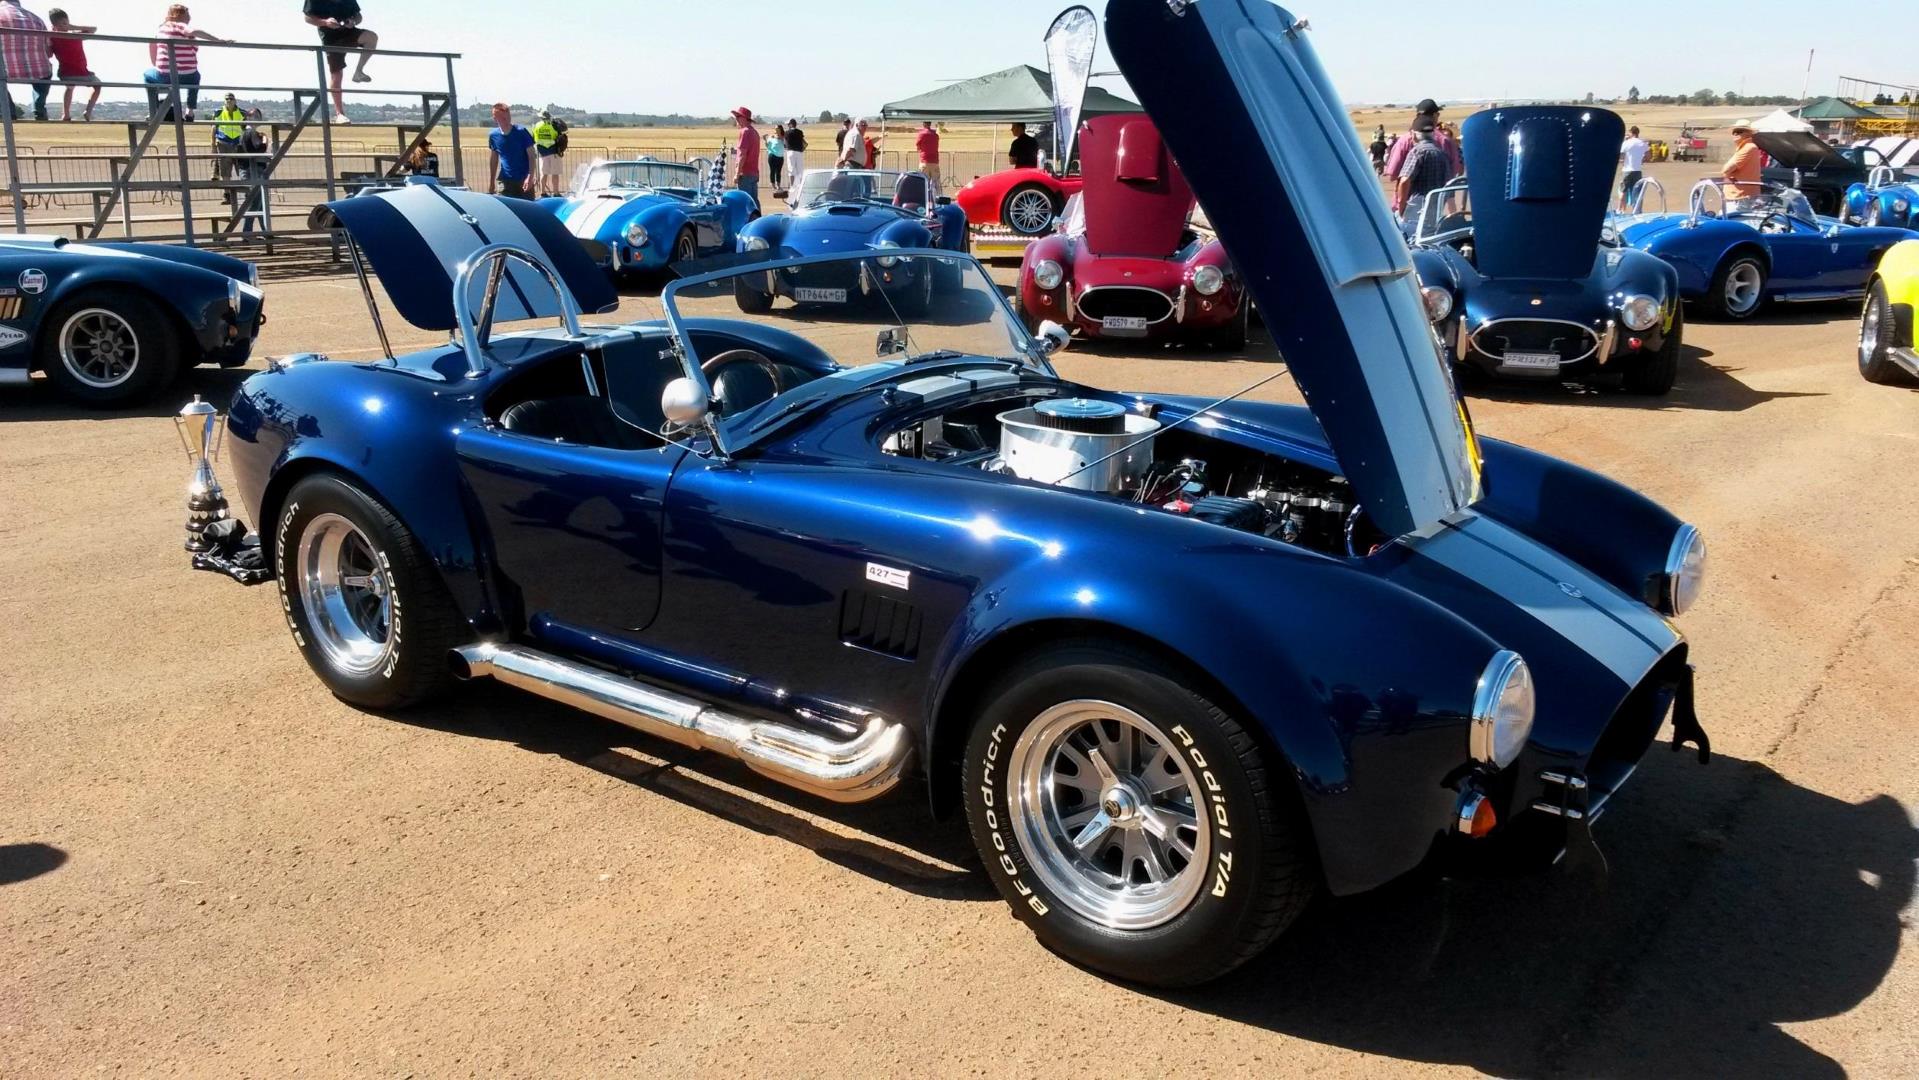 The Day A Cobra Went Completely Unnoticed Expert Ac Cobra Car Reviews Autotrader